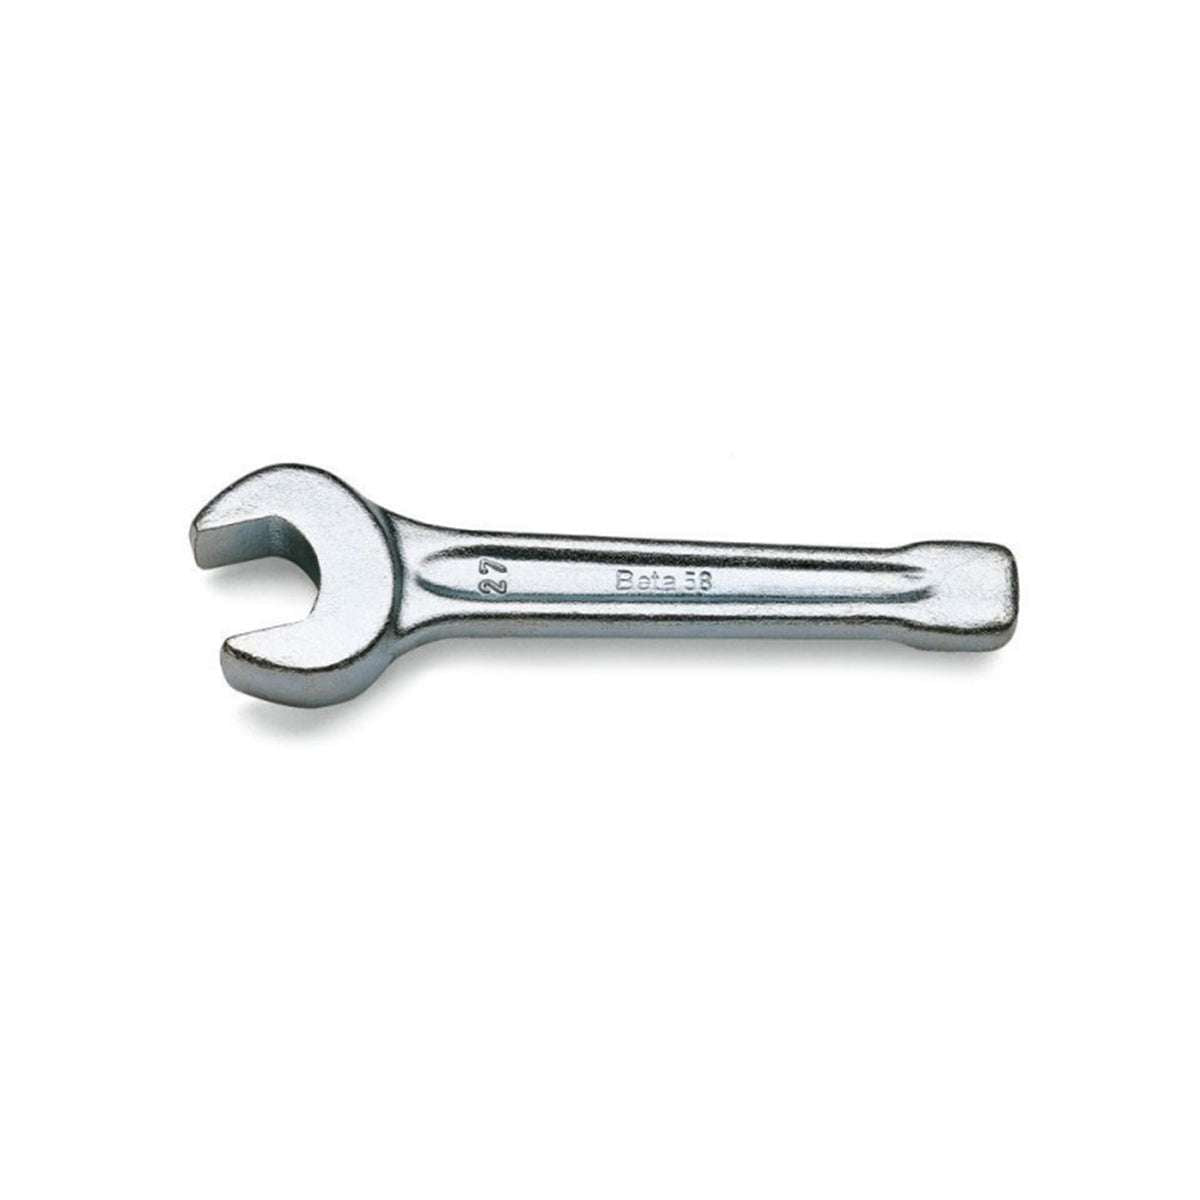 Open end slogging Wrenches - 58 Beta